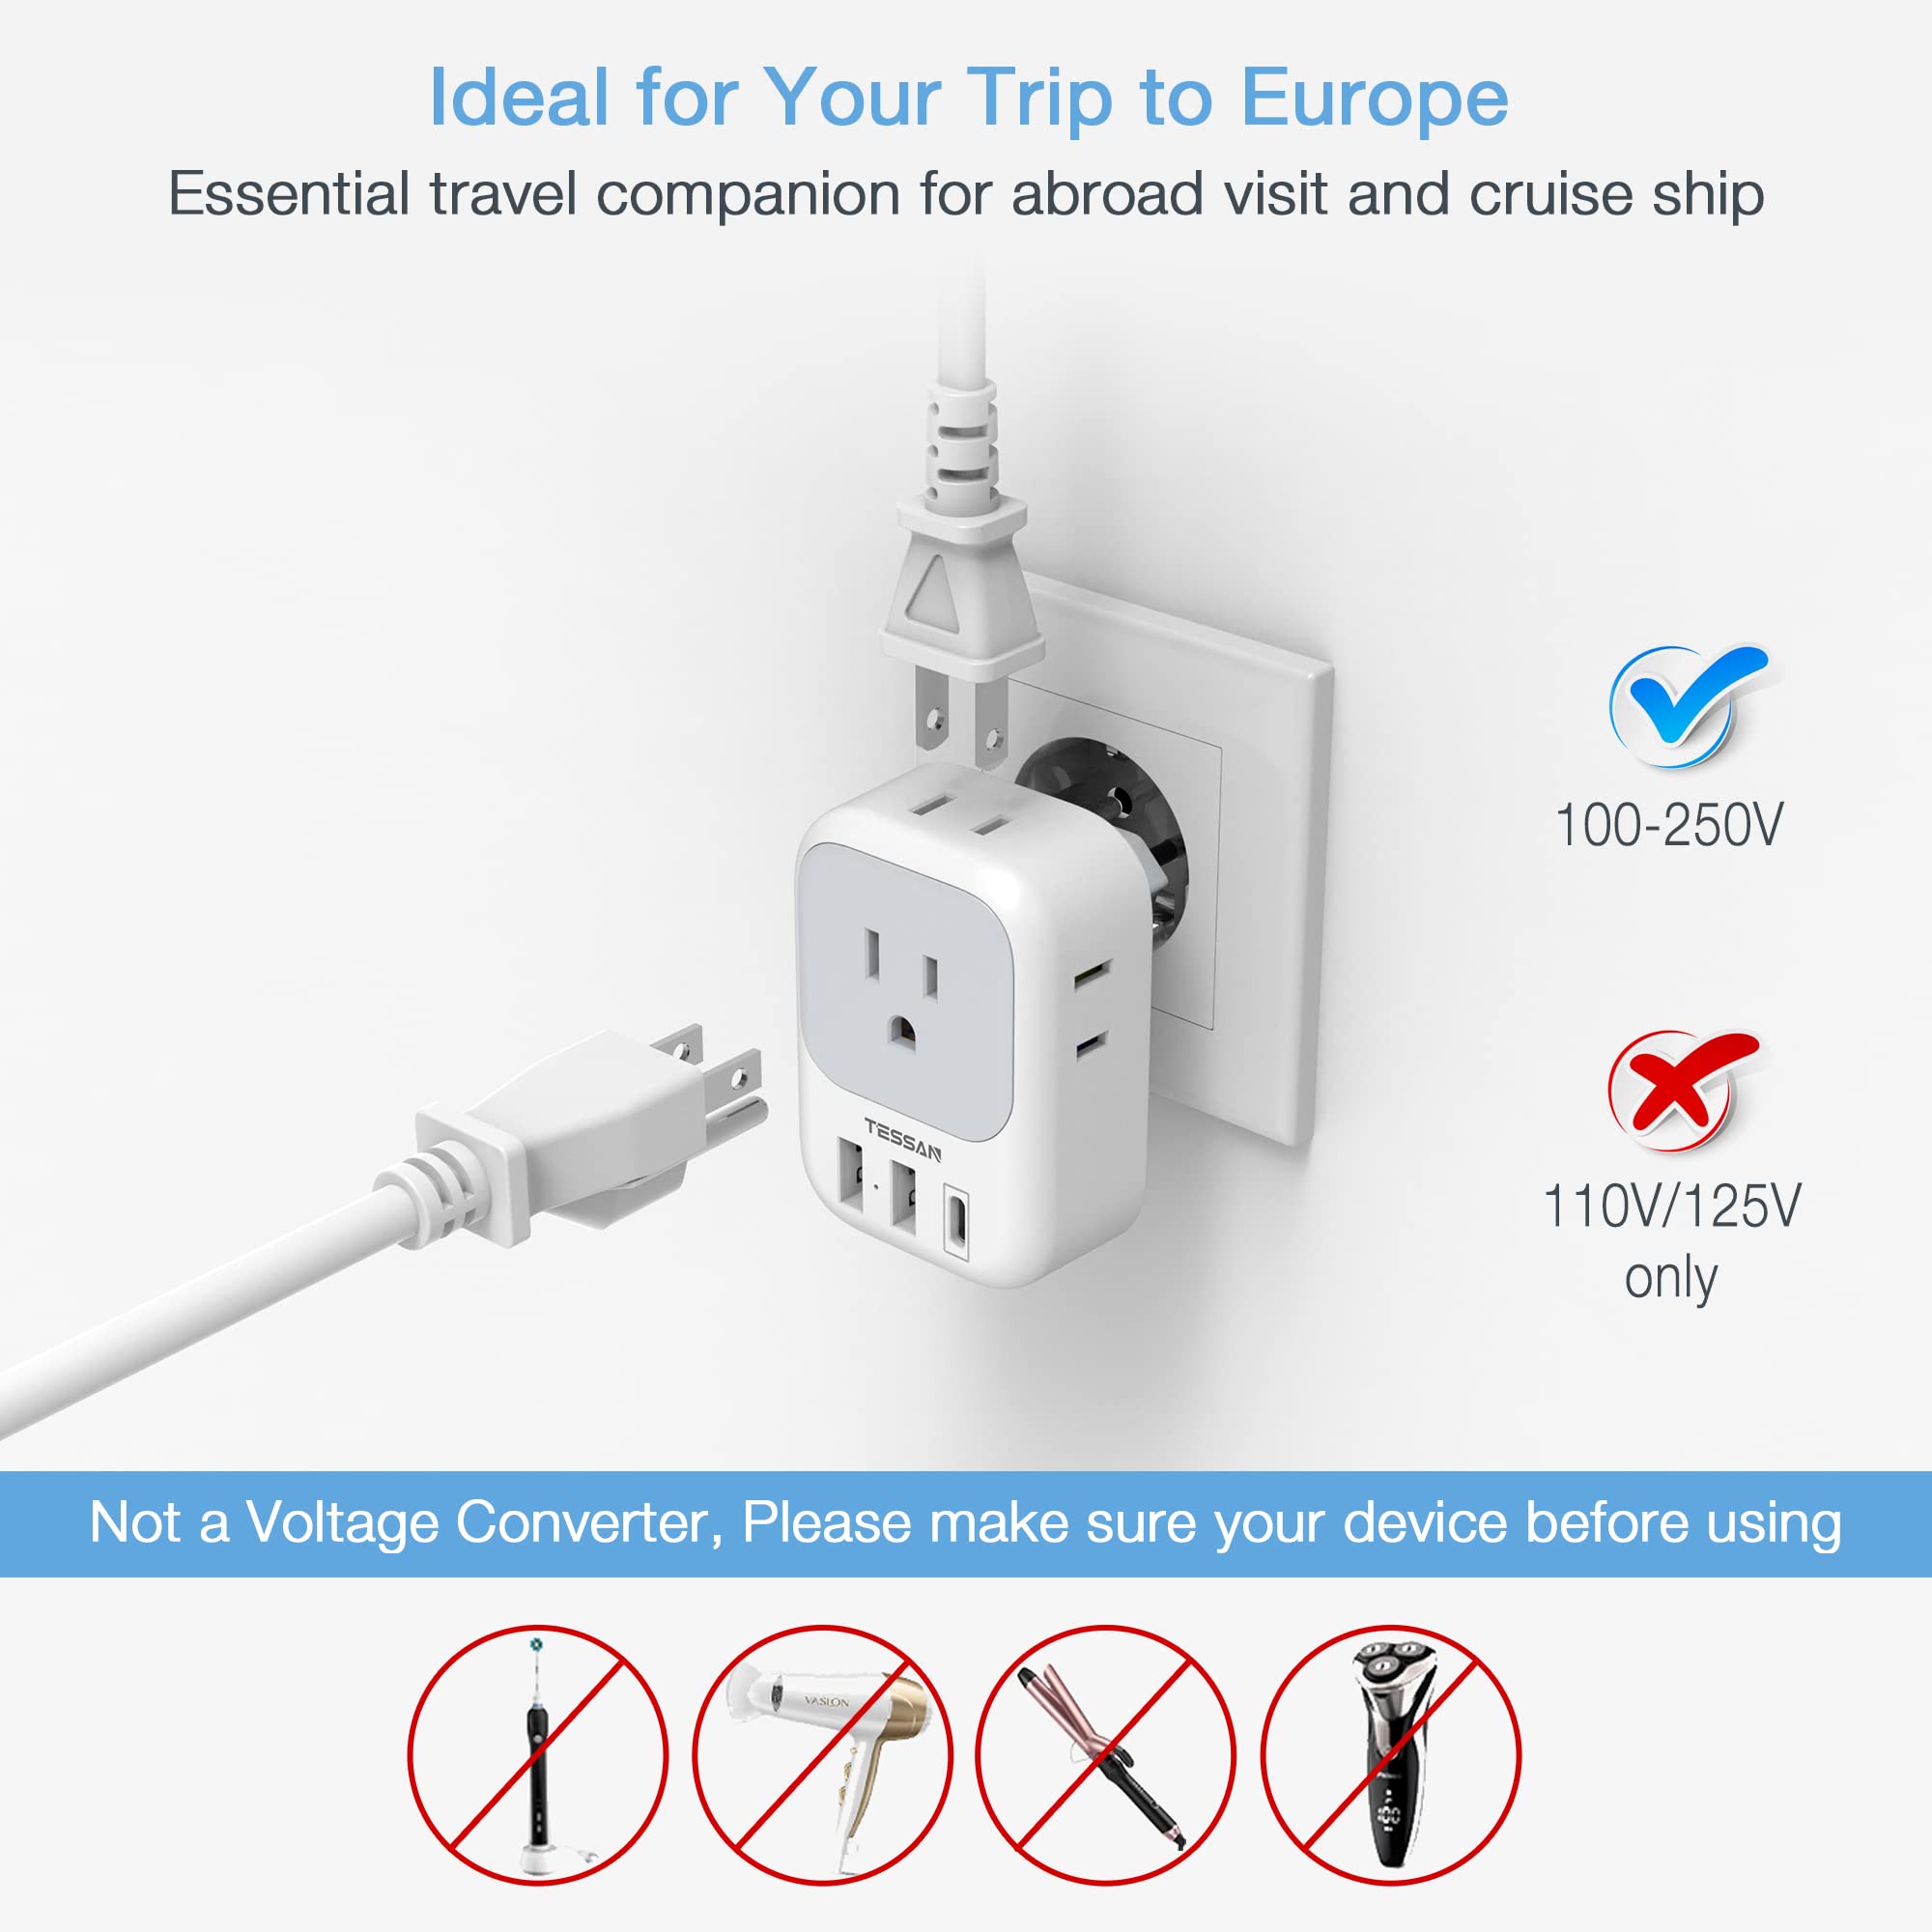 European Travel Plug Adapter USB C, TESSAN International Plug Adapter with 4 AC Outlets and 3 USB Ports, Type C Power Adaptor Charger for US to Most of Europe Iceland Spain Italy France Germany